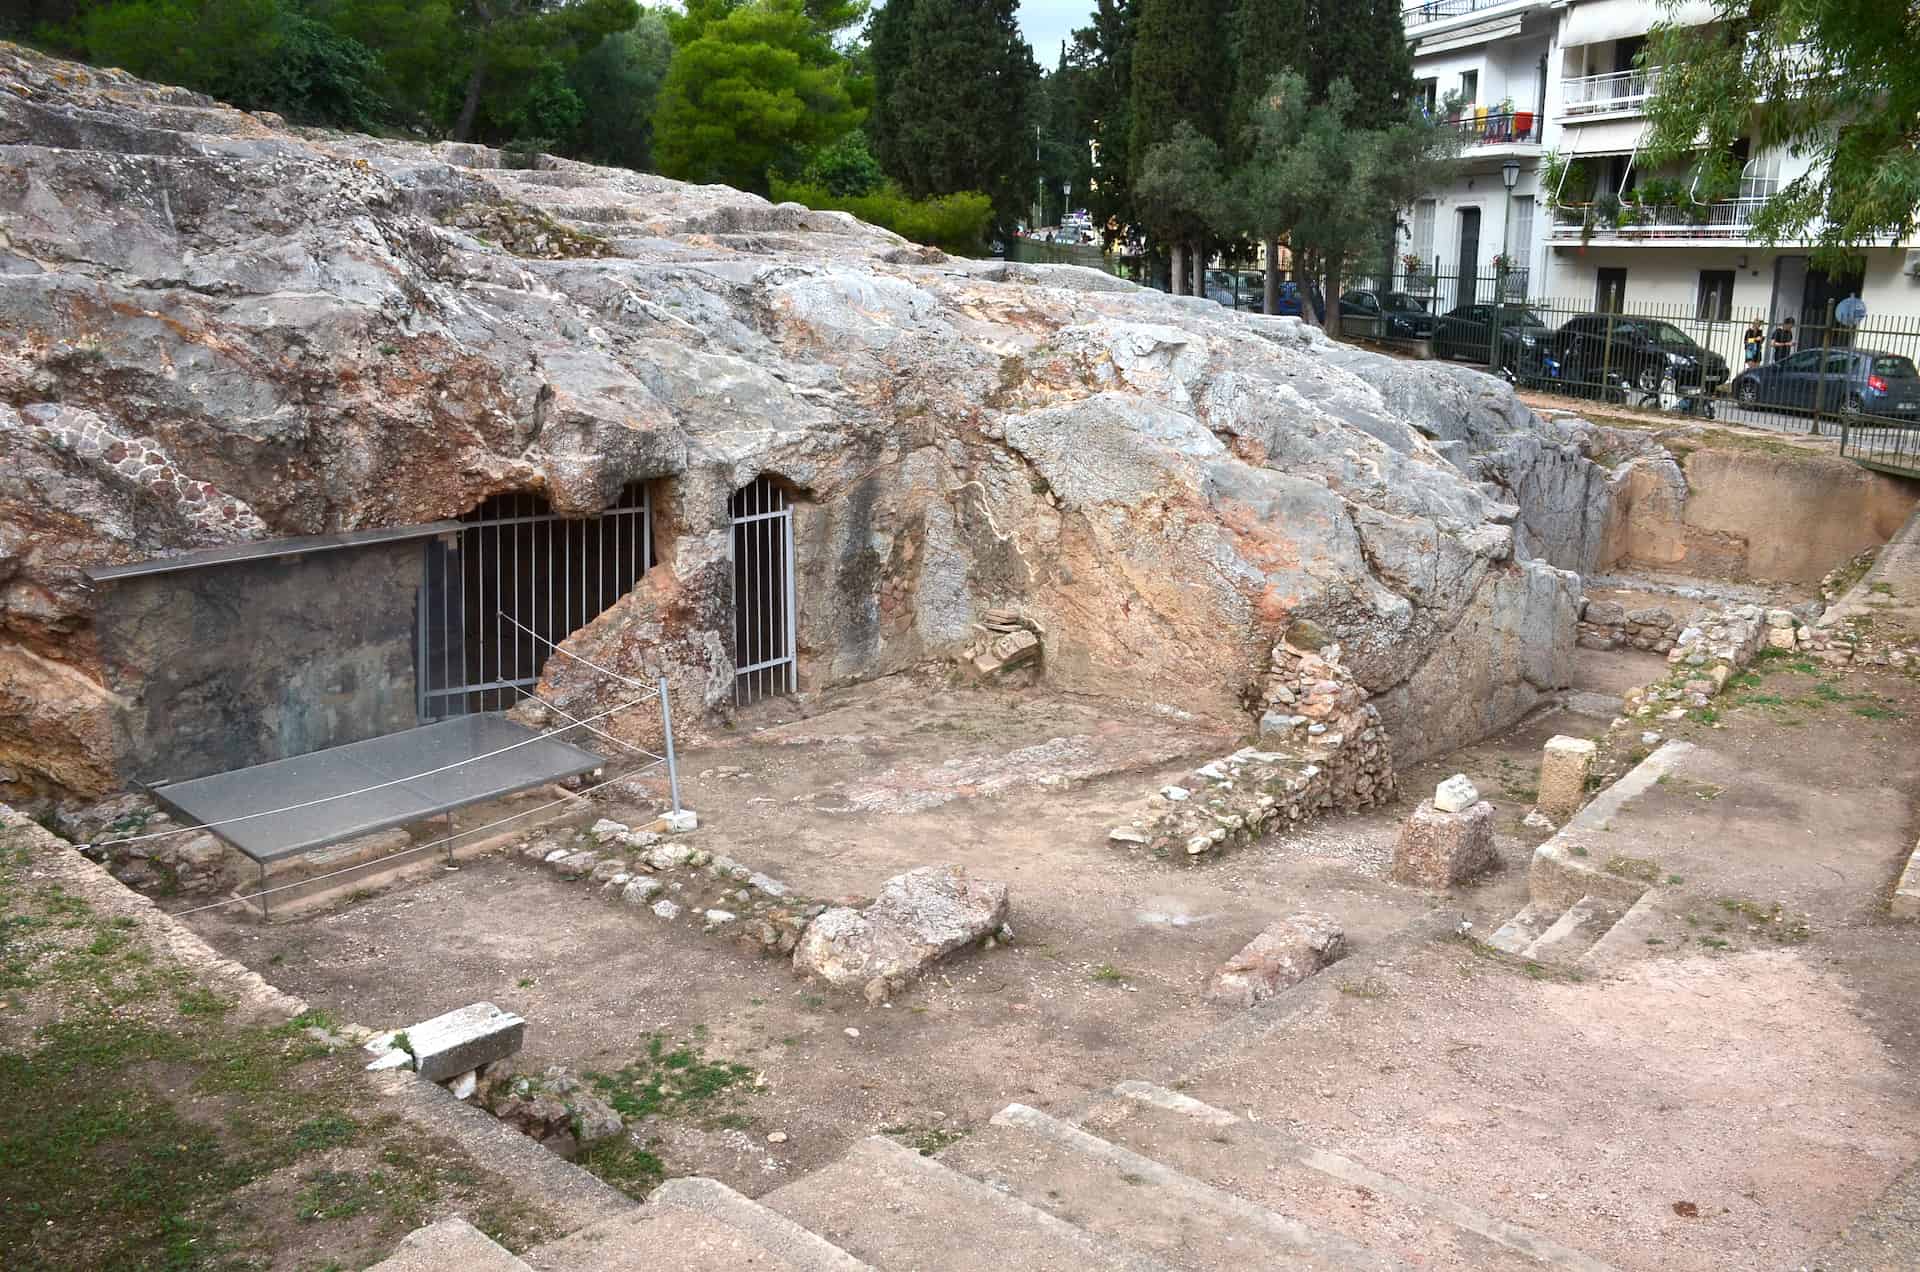 Sanctuary of Pan at the Pnyx, Western Hills of Athens, Greece